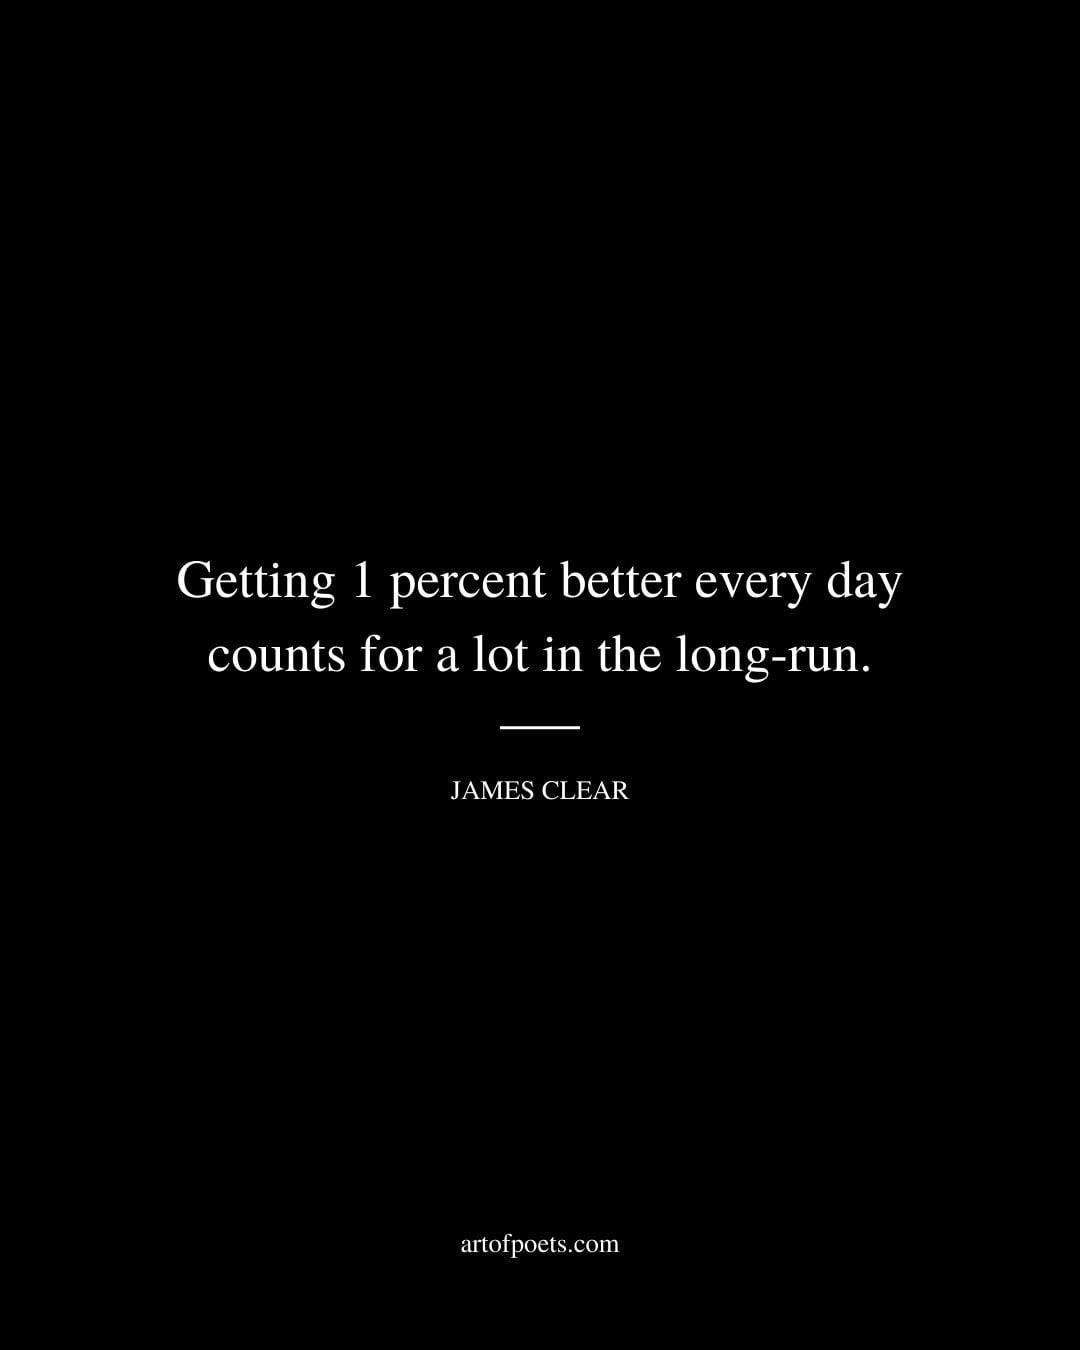 Getting 1 percent better every day counts for a lot in the long run